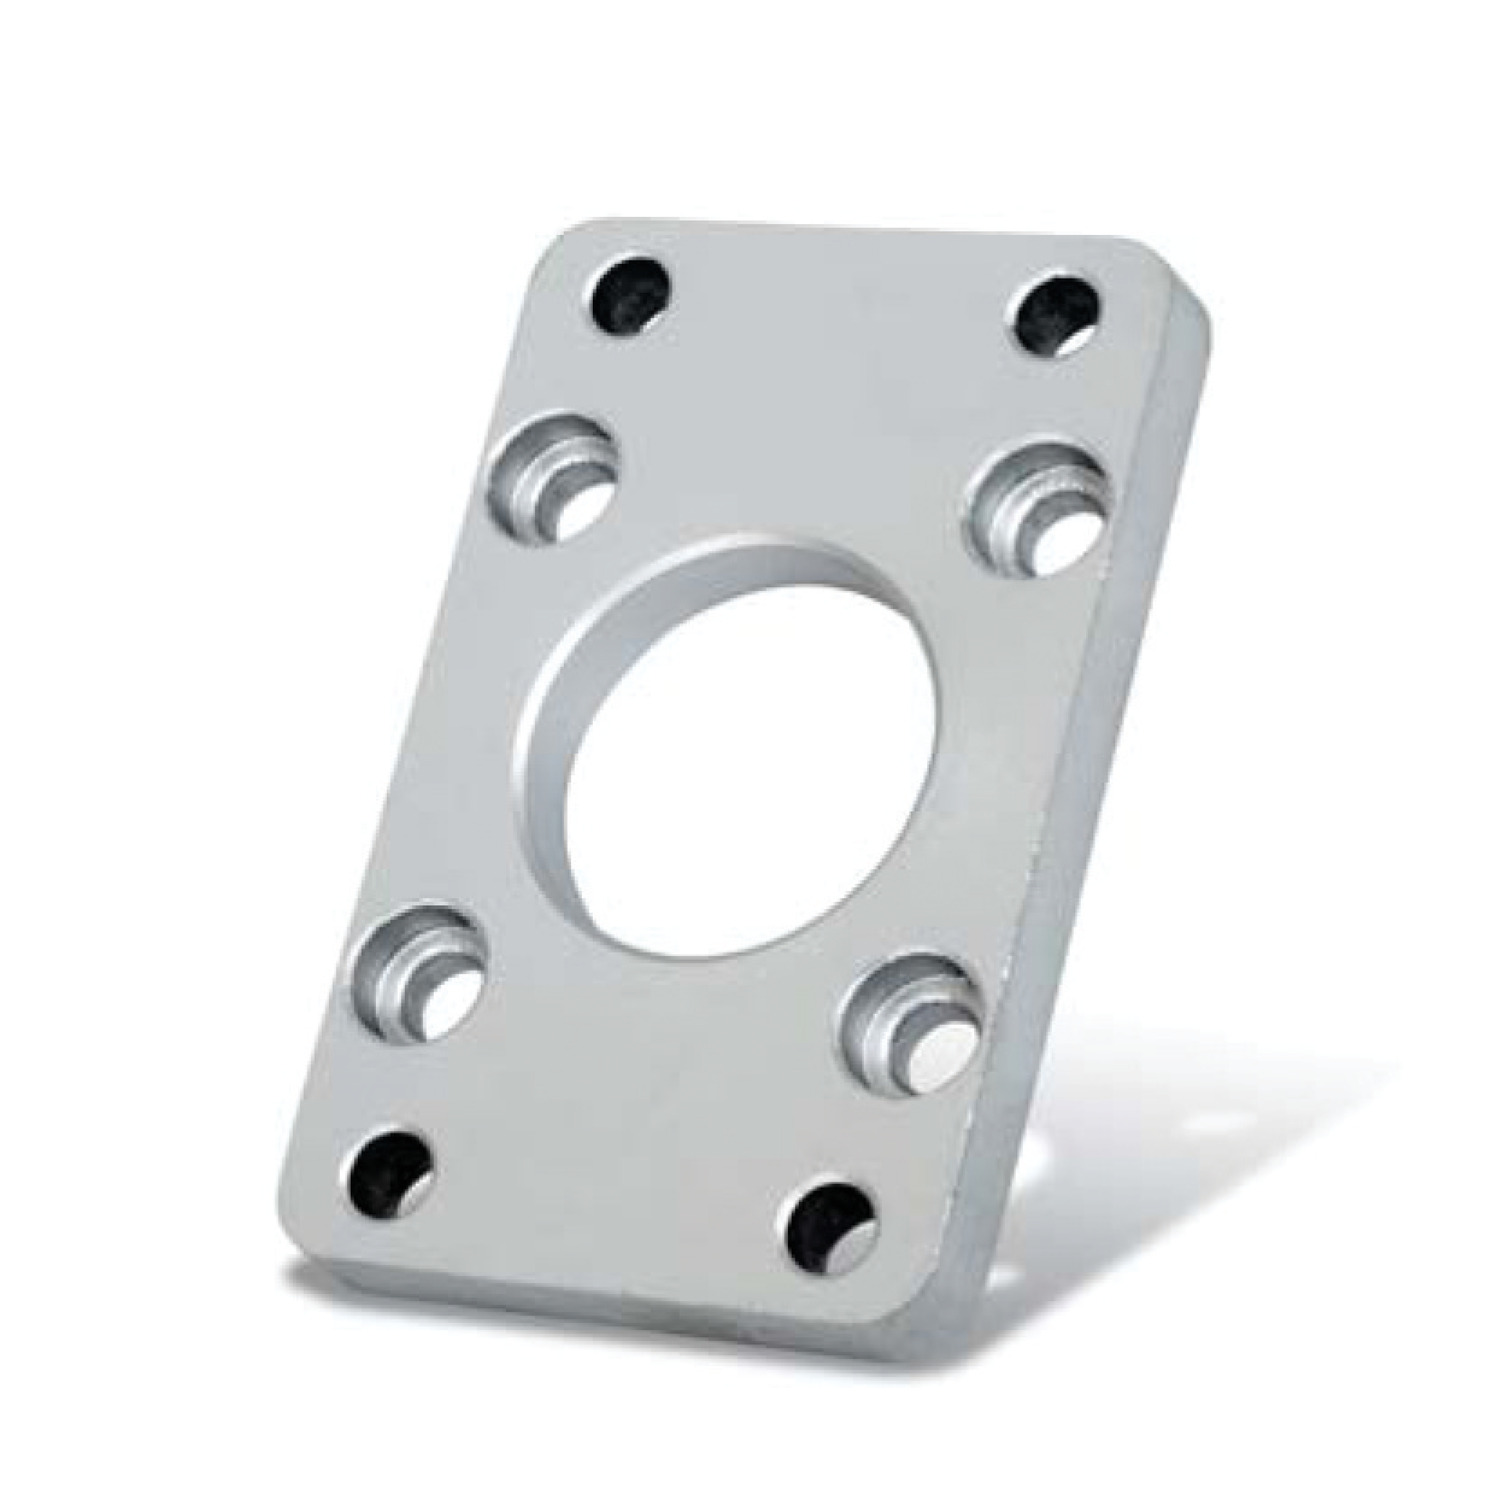 L4814 - Air Cylinder Mounts - CETOP Series